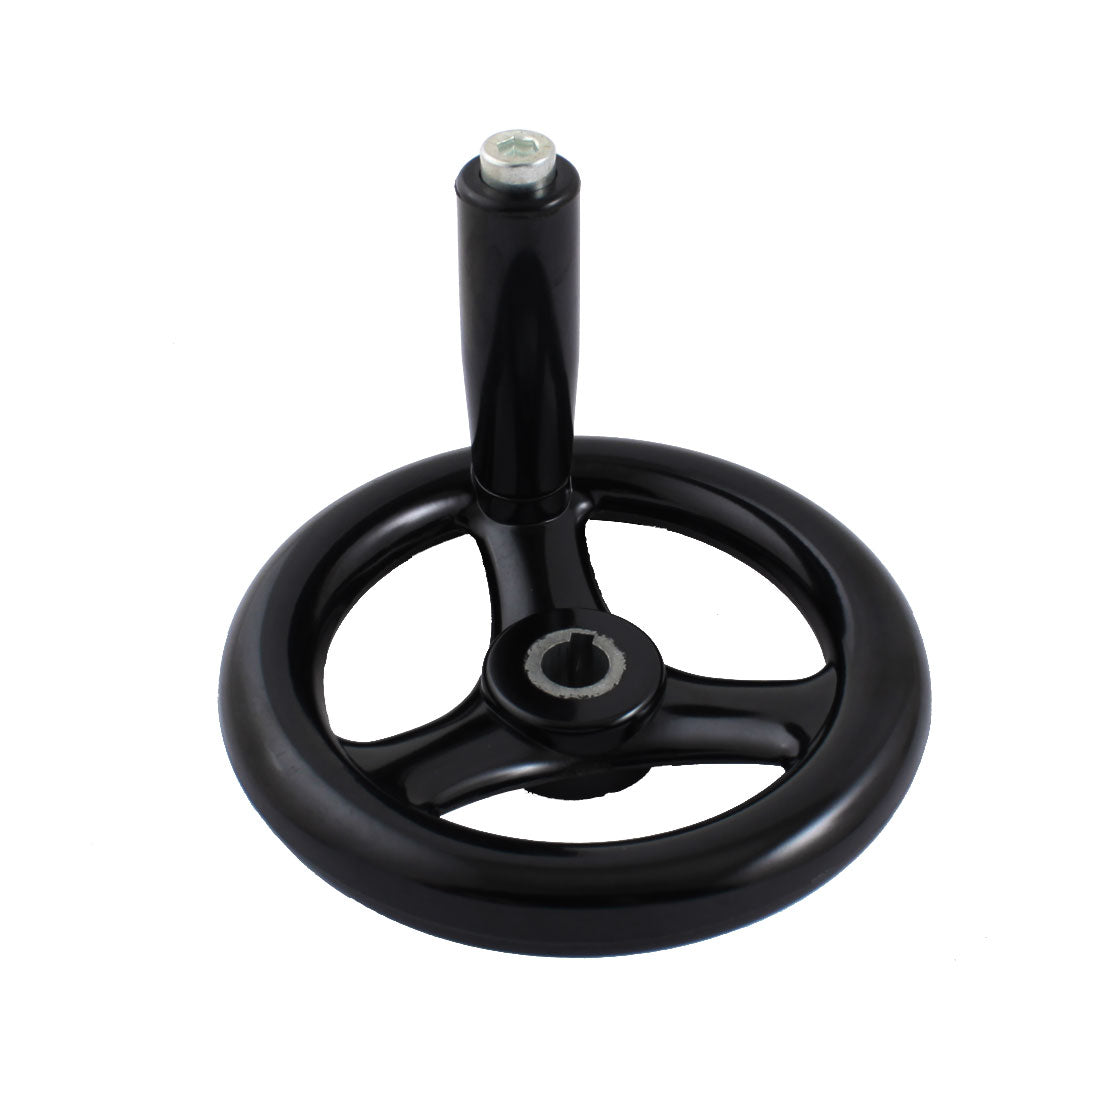 uxcell Uxcell 12mmx125mm Round Black Plastic 3 Spoke Hand Wheel Handwheel w Removable Handle for Lathe Milling Machine